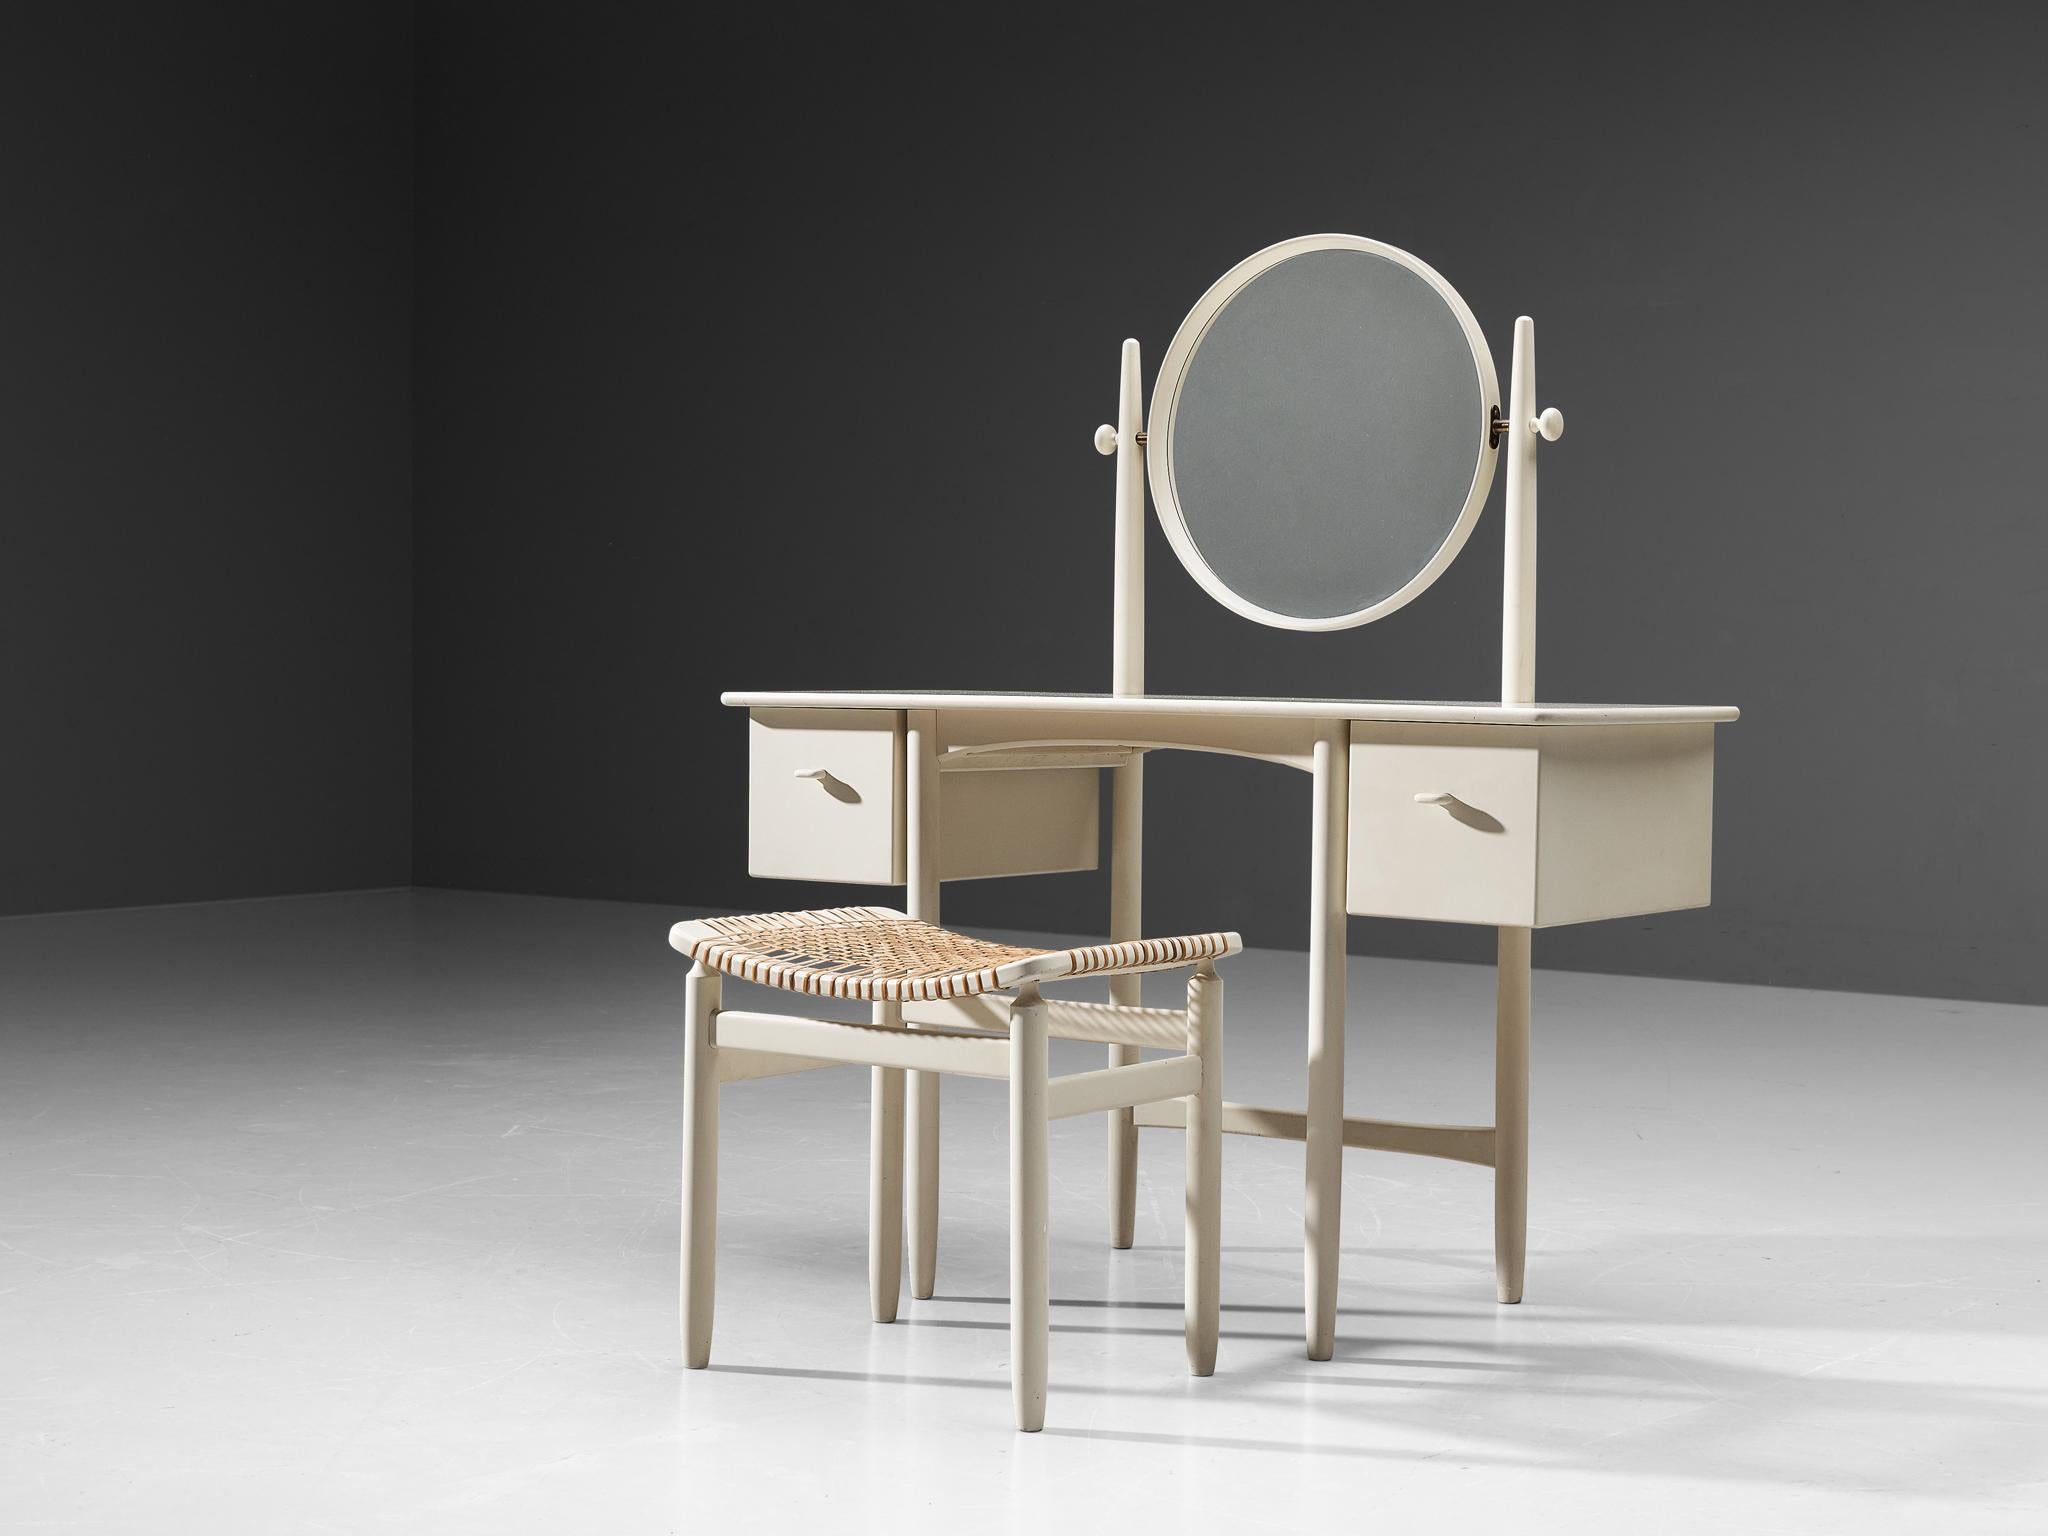 Sven Engström & Gunnar Myrstrand for Bodafors, vanity table with stool, lacquered wood, mirror, brass, cane, Sweden, 1960s.

This elegant vanity table with stool combines simplicity with style in an superb manner. Executed in white lacquered wood,